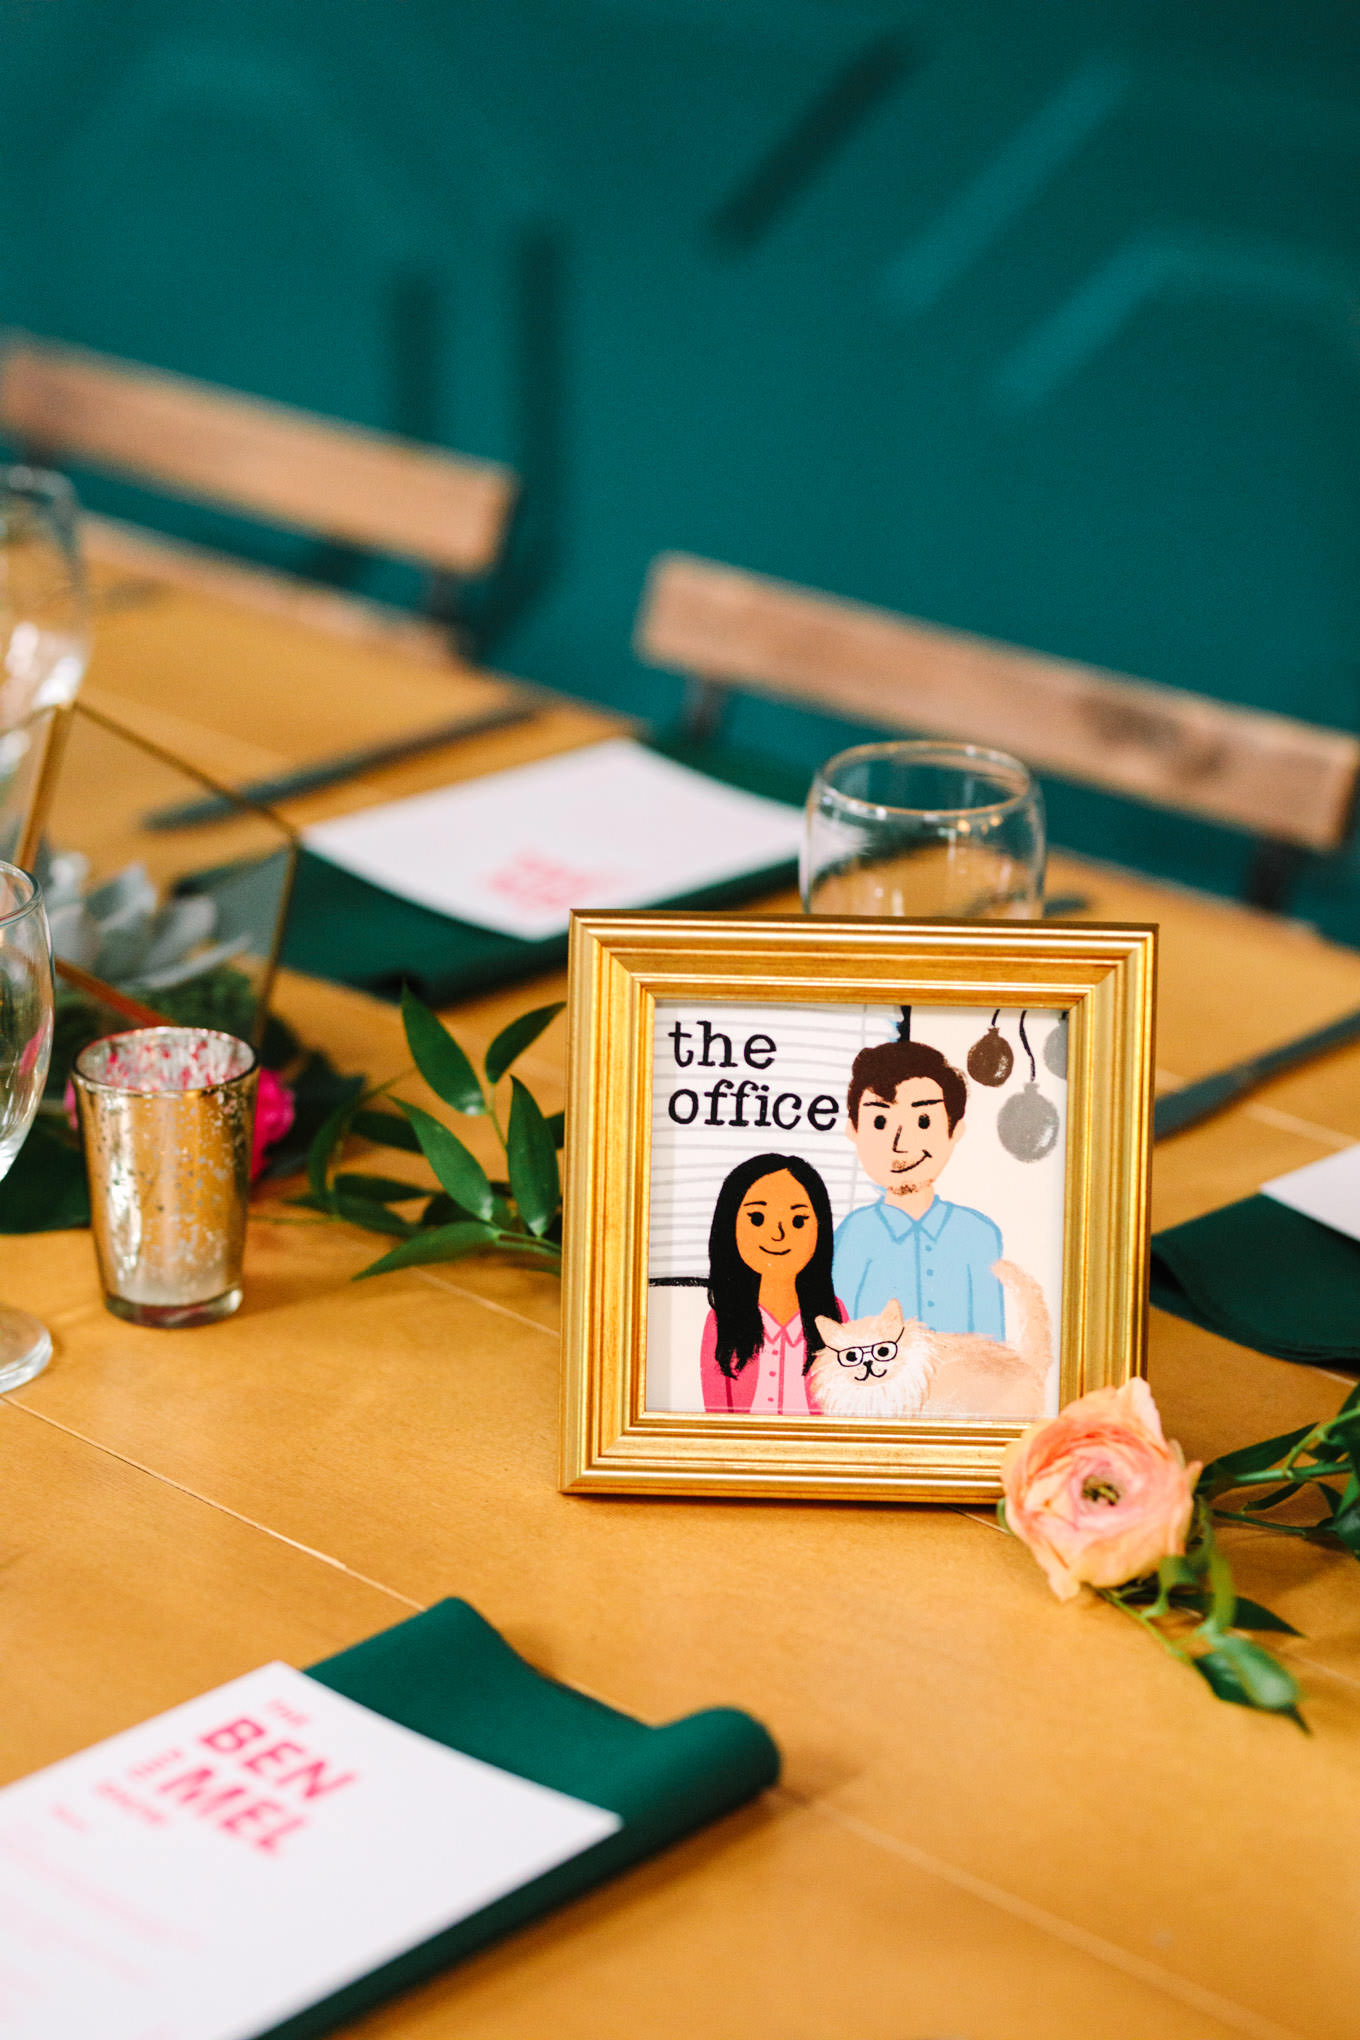 The Office table illustration featuring the bride and groom | TV inspired wedding at The Fig House Los Angeles | Published on The Knot | Fresh and colorful photography for fun-loving couples in Southern California | #losangeleswedding #TVwedding #colorfulwedding #theknot   Source: Mary Costa Photography | Los Angeles wedding photographer